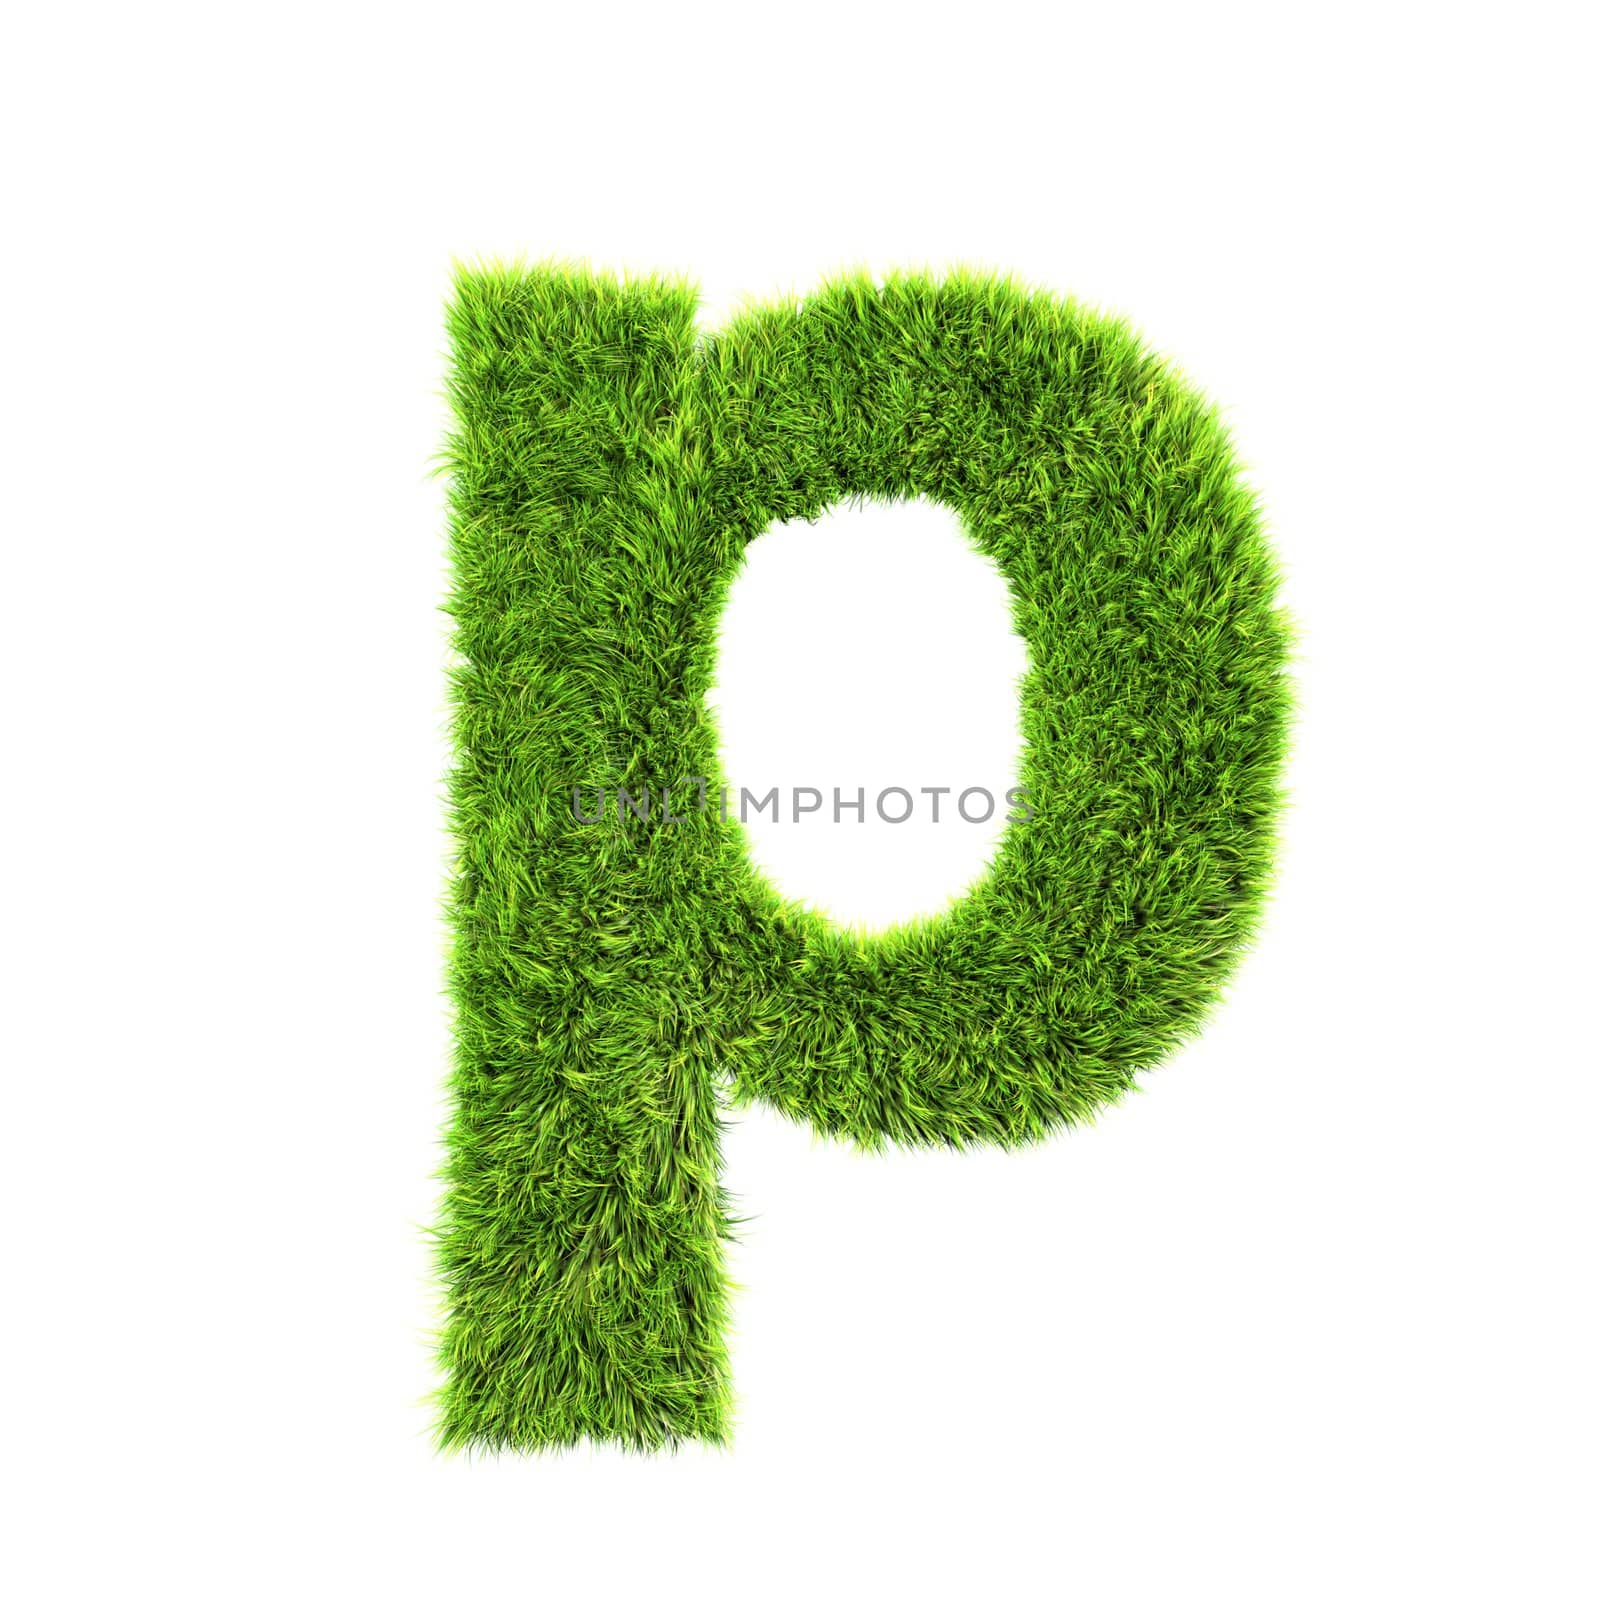 3d grass letter isolated on white background - p by chrisroll